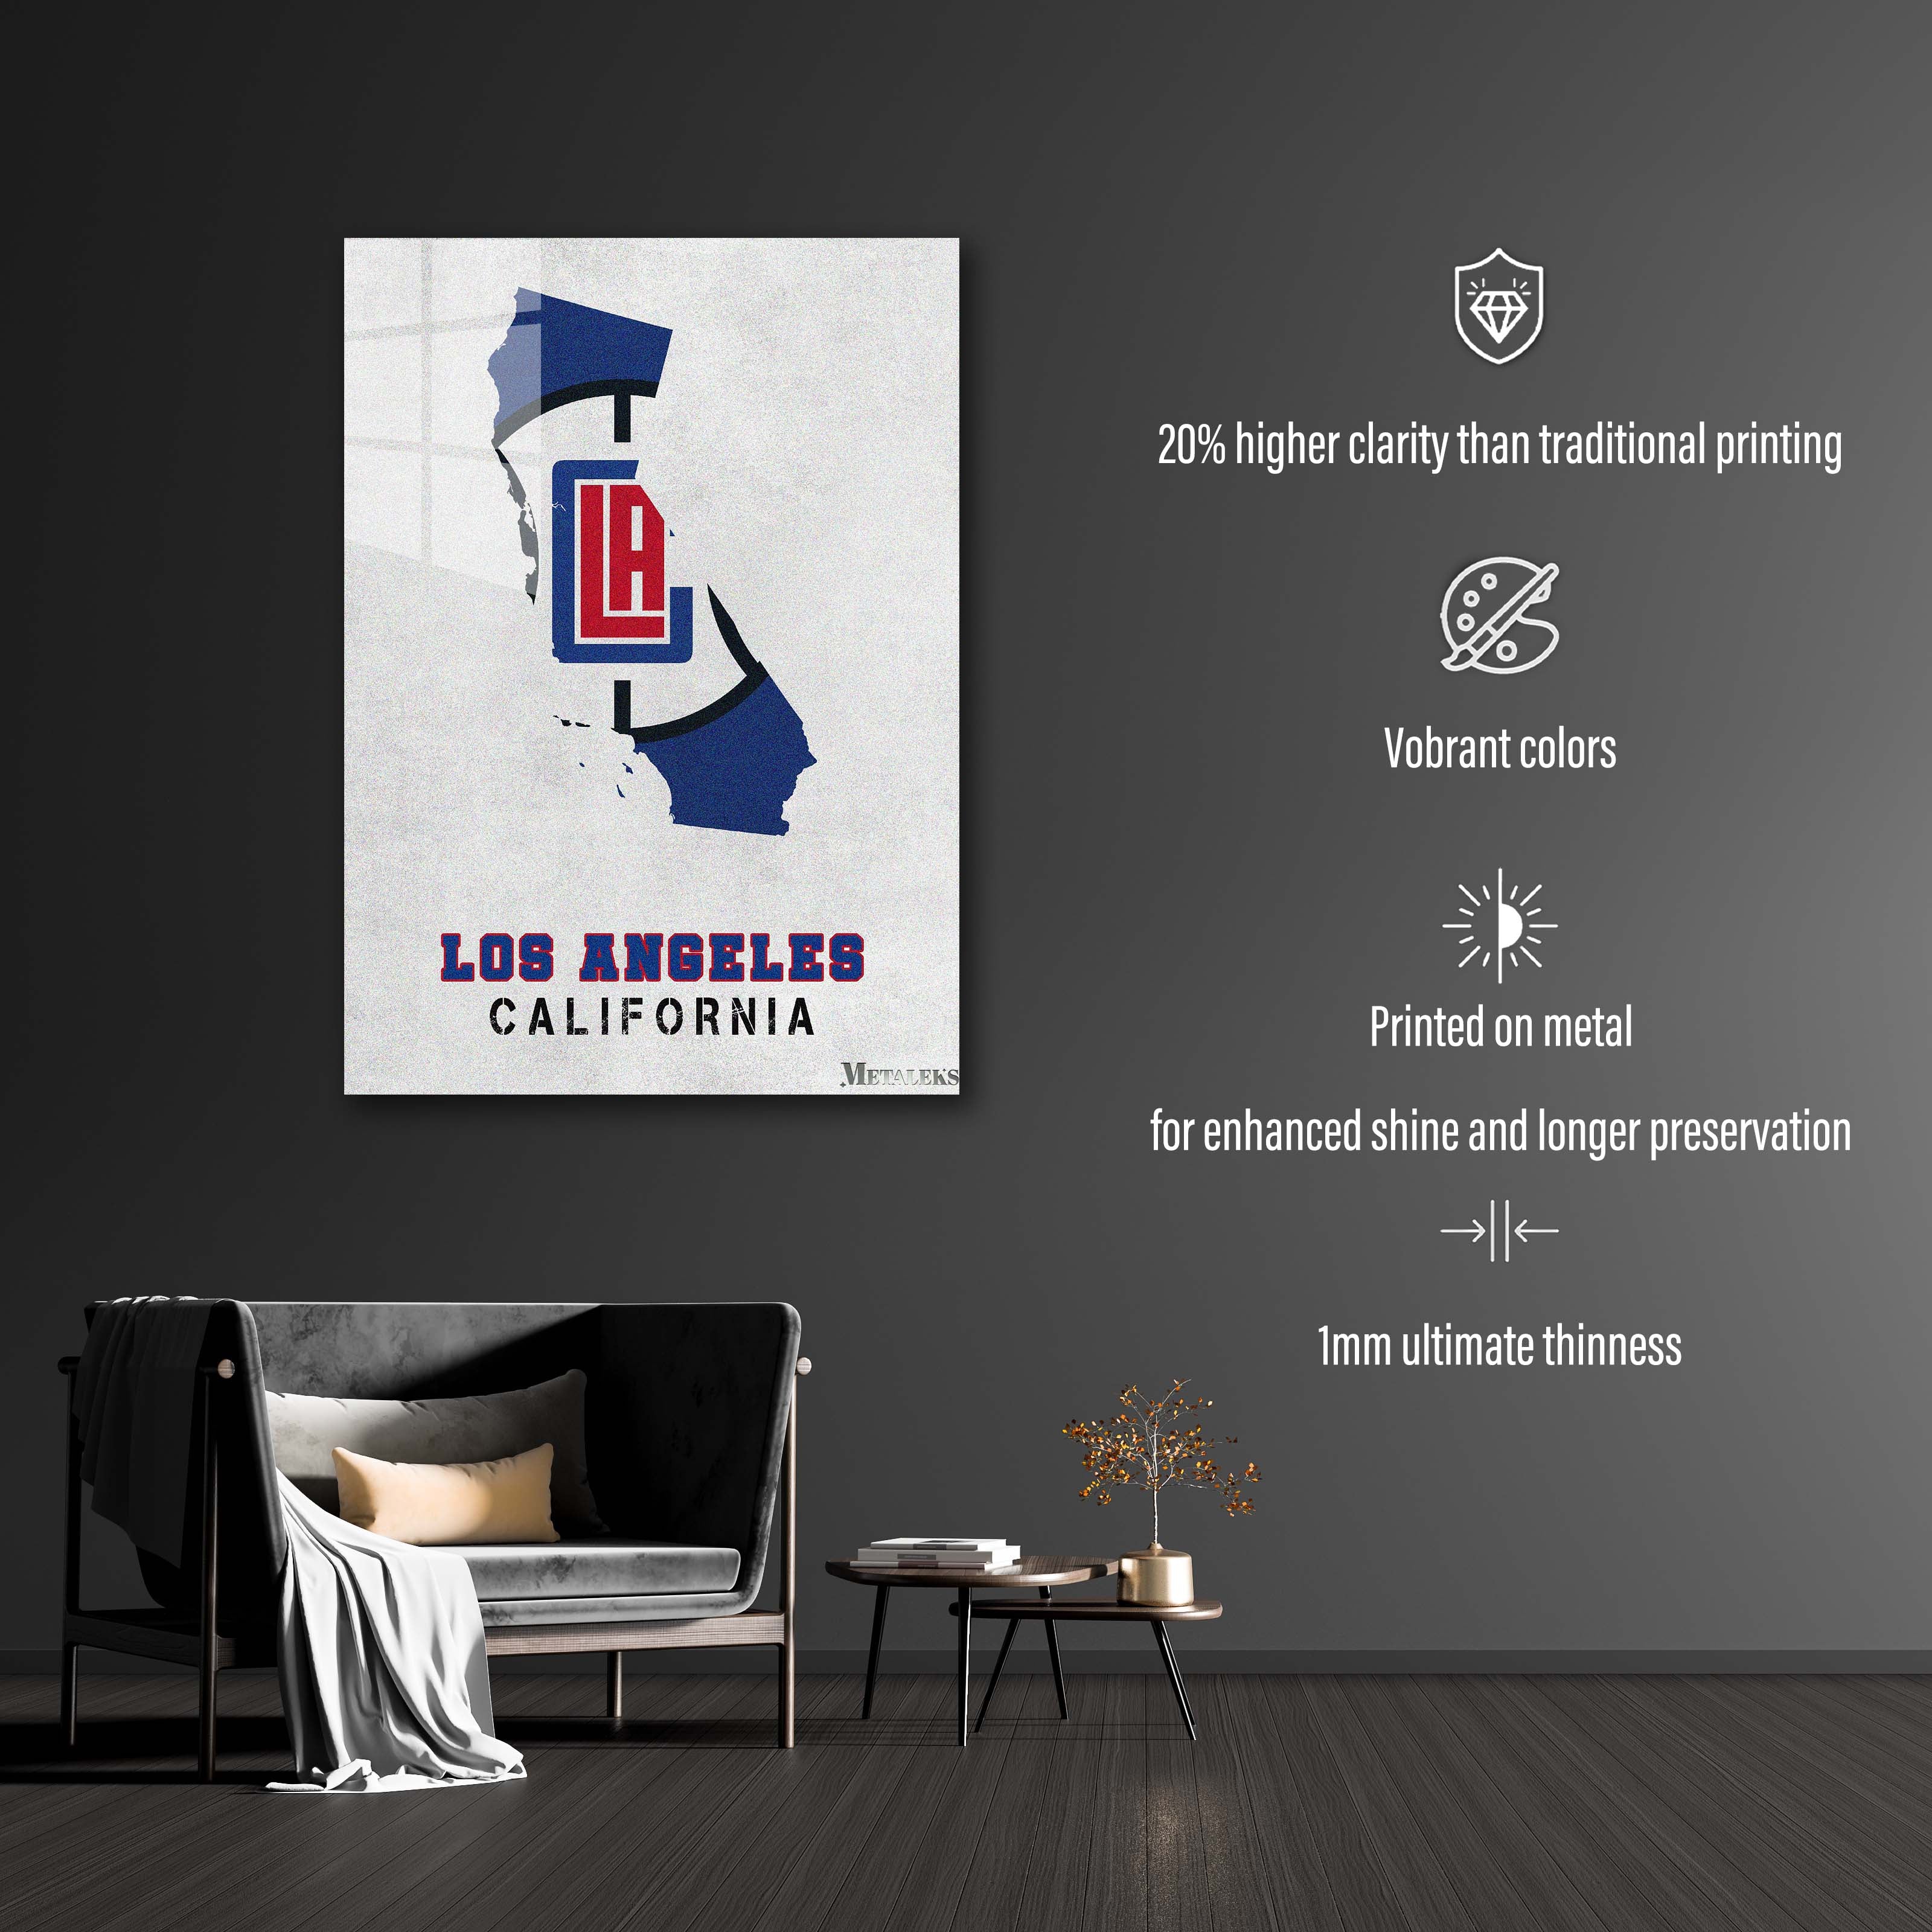 Los Angeles Clippers California State Map-designed by @Hoang Van Thuan